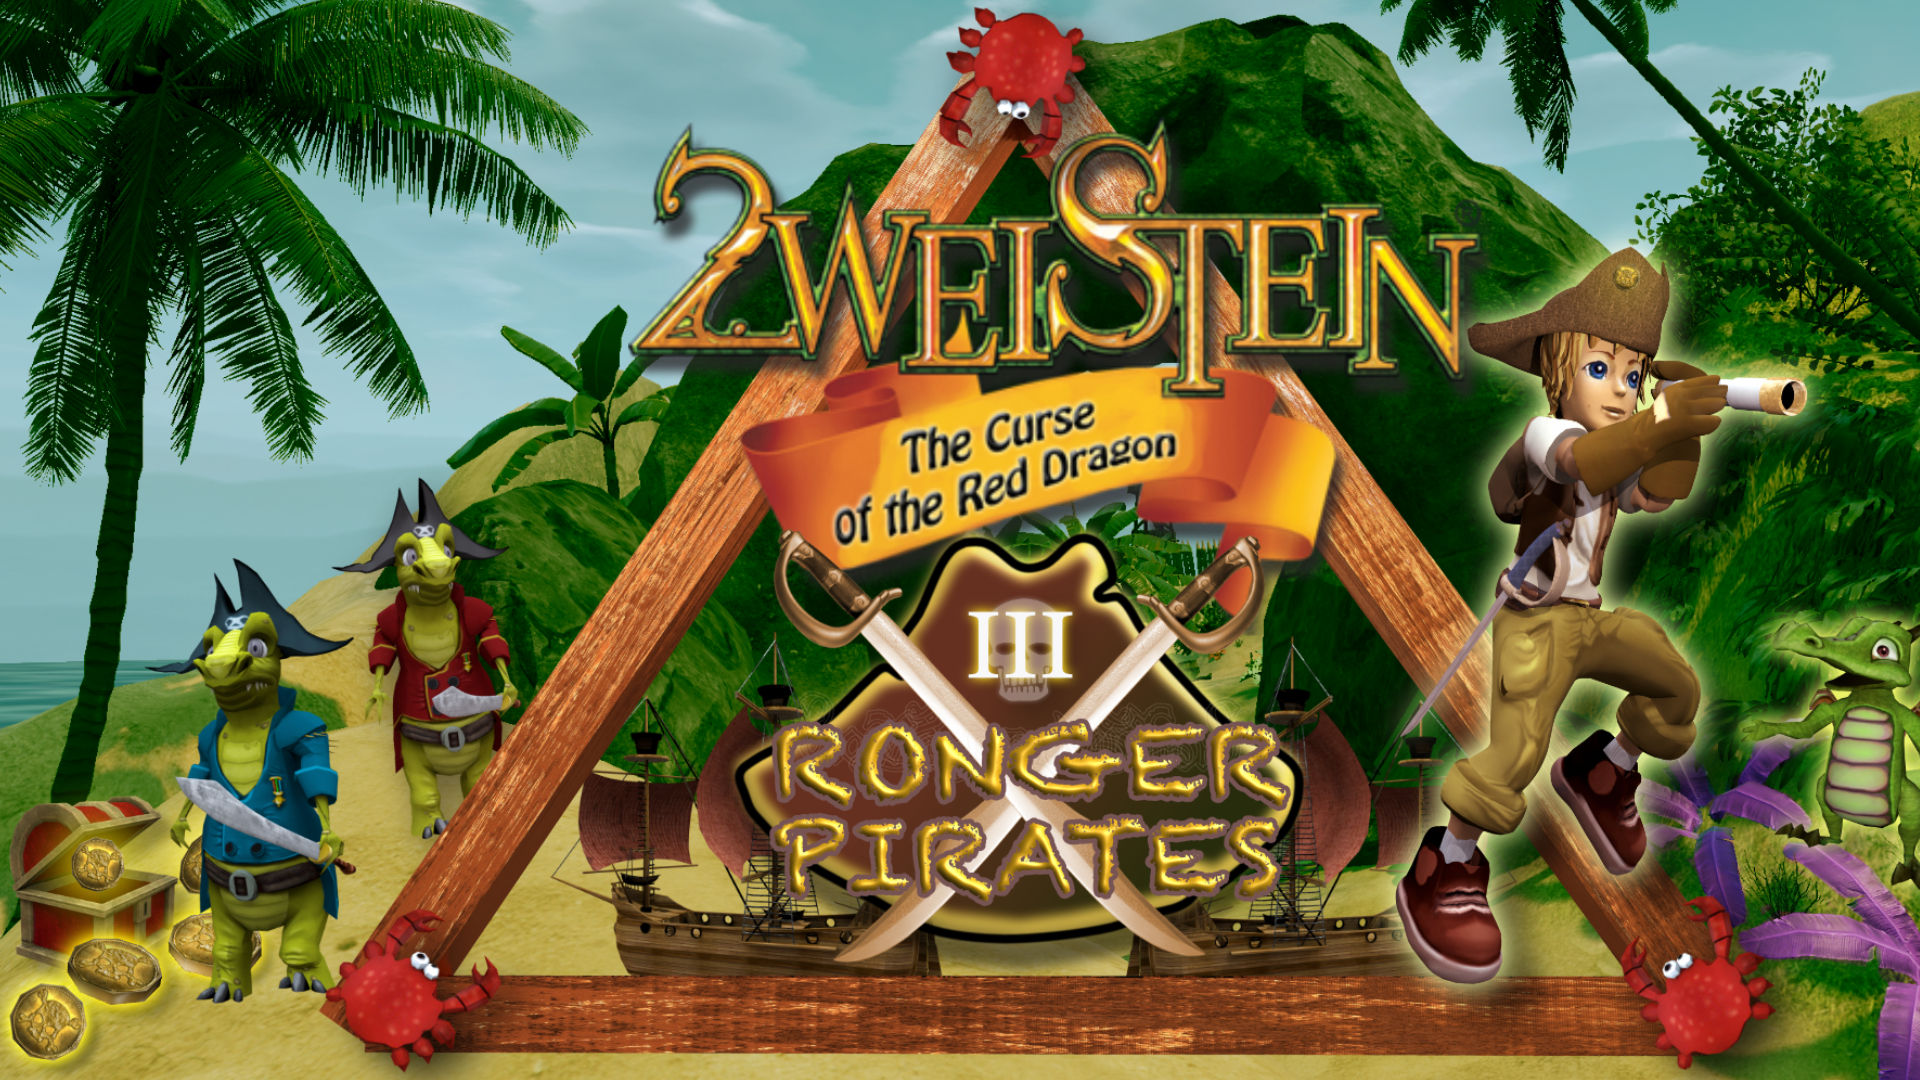 2weistein – The Curse of the Red Dragon 3 - Ronger Pirates - V2